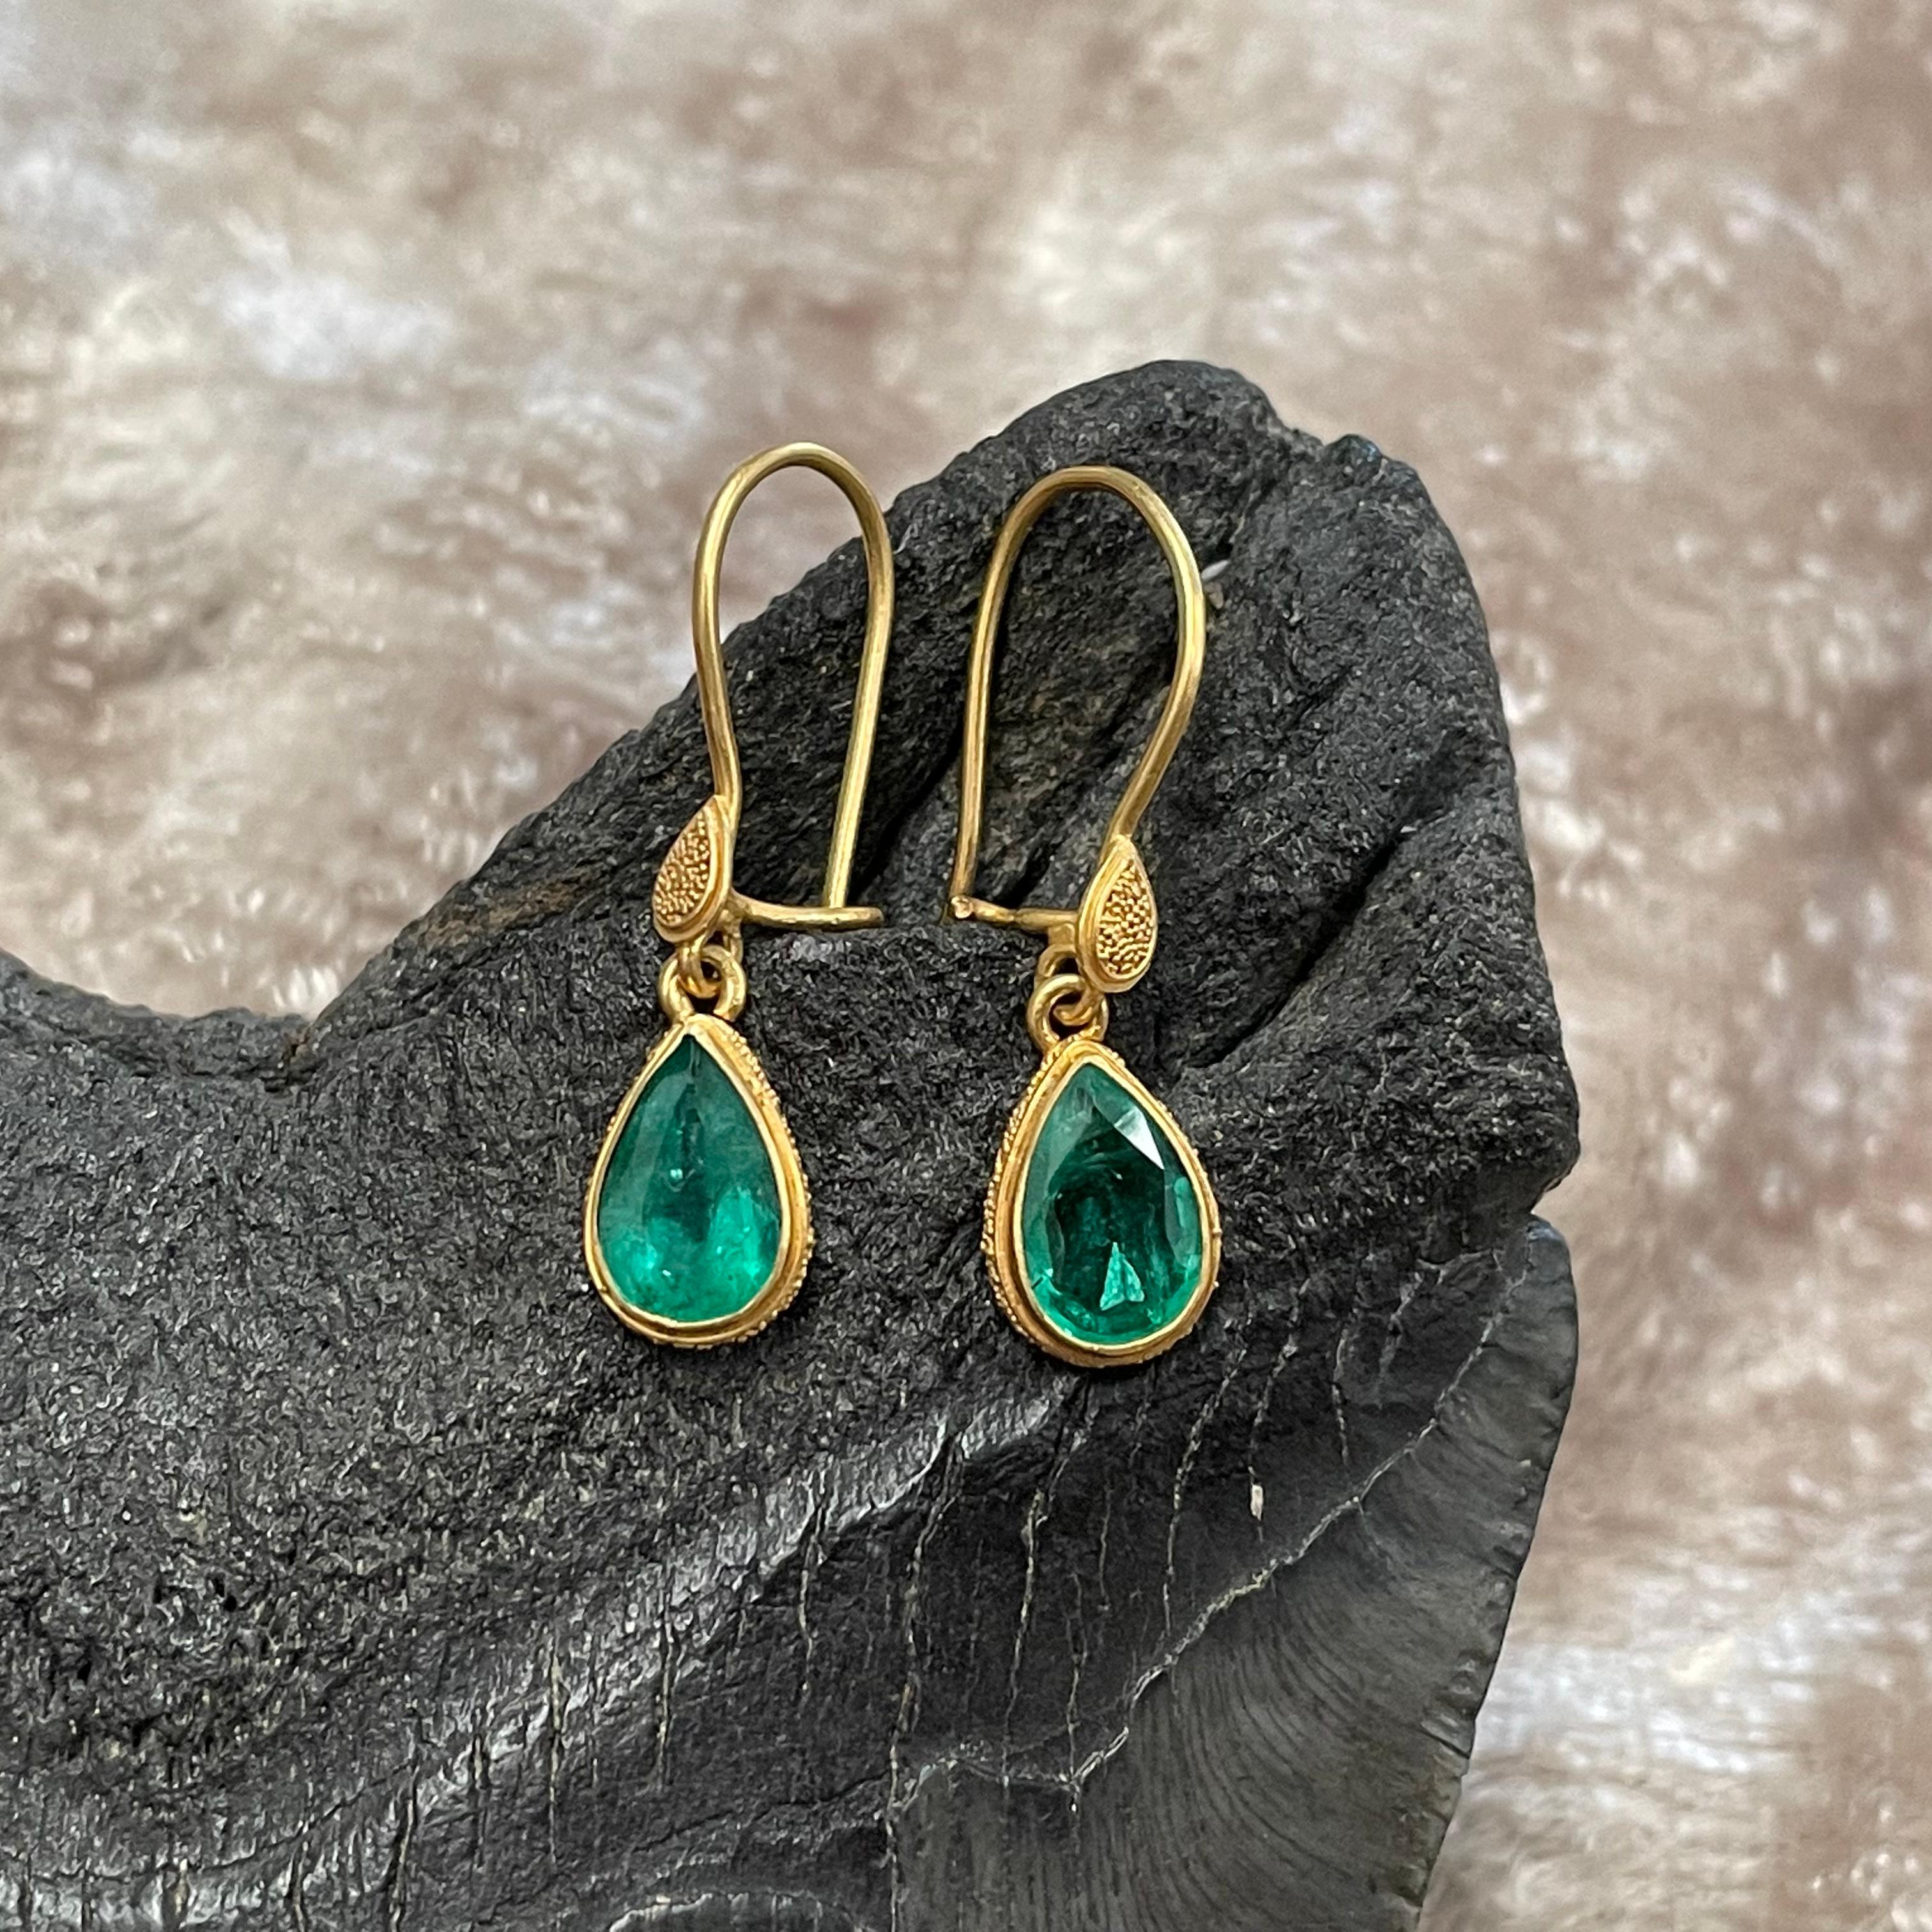 A pair of lively 6x9 mm pear shaped faceted Zambian emeralds are gently suspended in a 22K settings with fine 